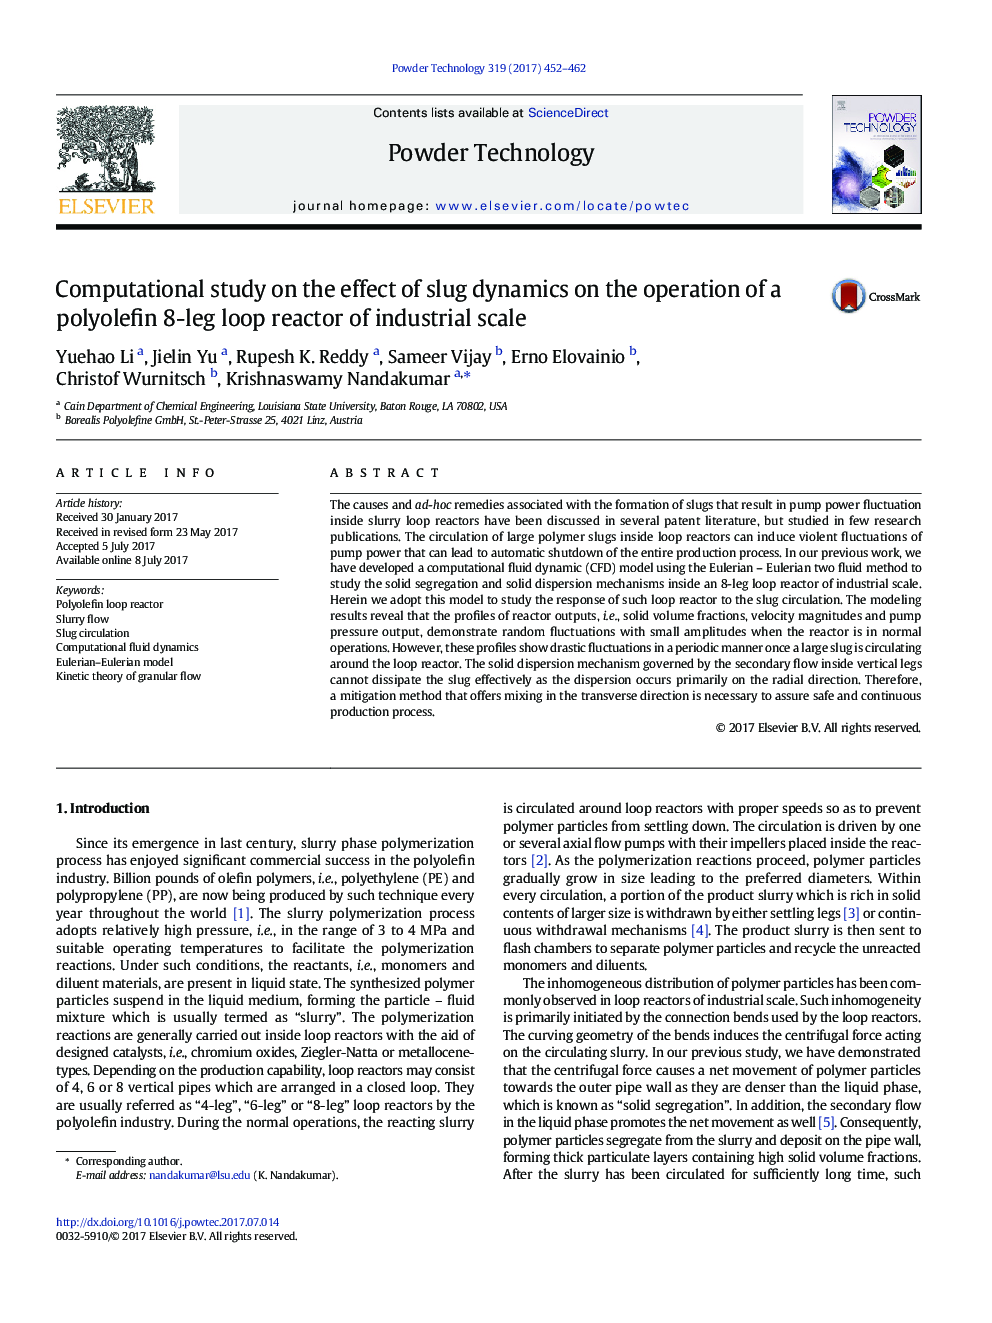 Computational study on the effect of slug dynamics on the operation of a polyolefin 8-leg loop reactor of industrial scale